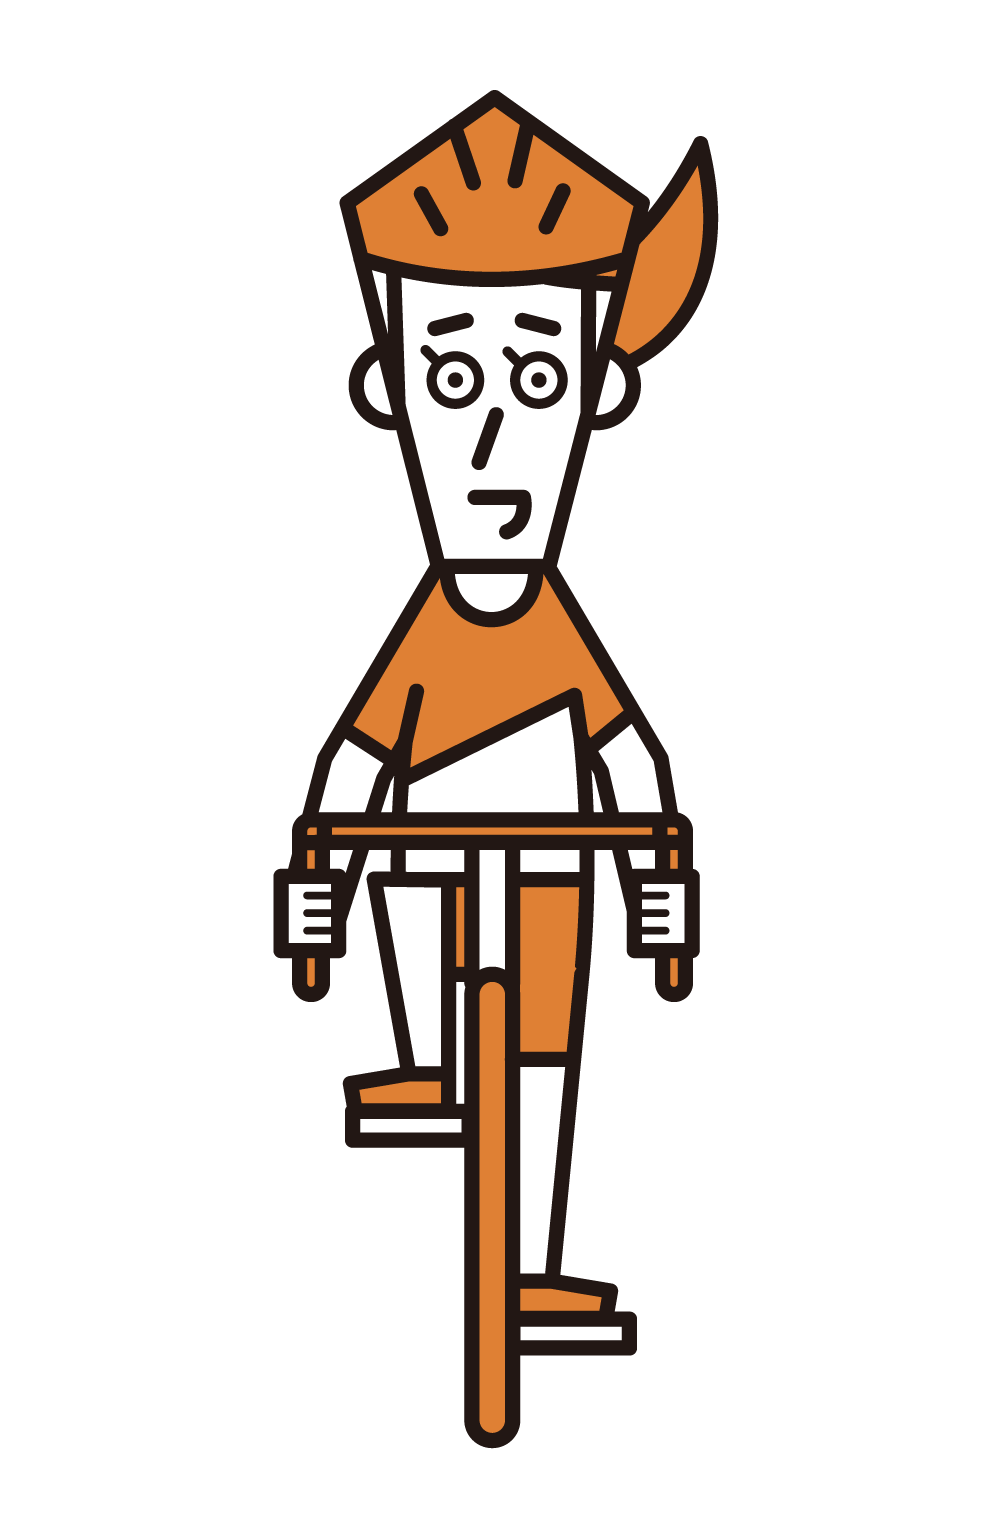 Illustration of a person (female) riding a road bike